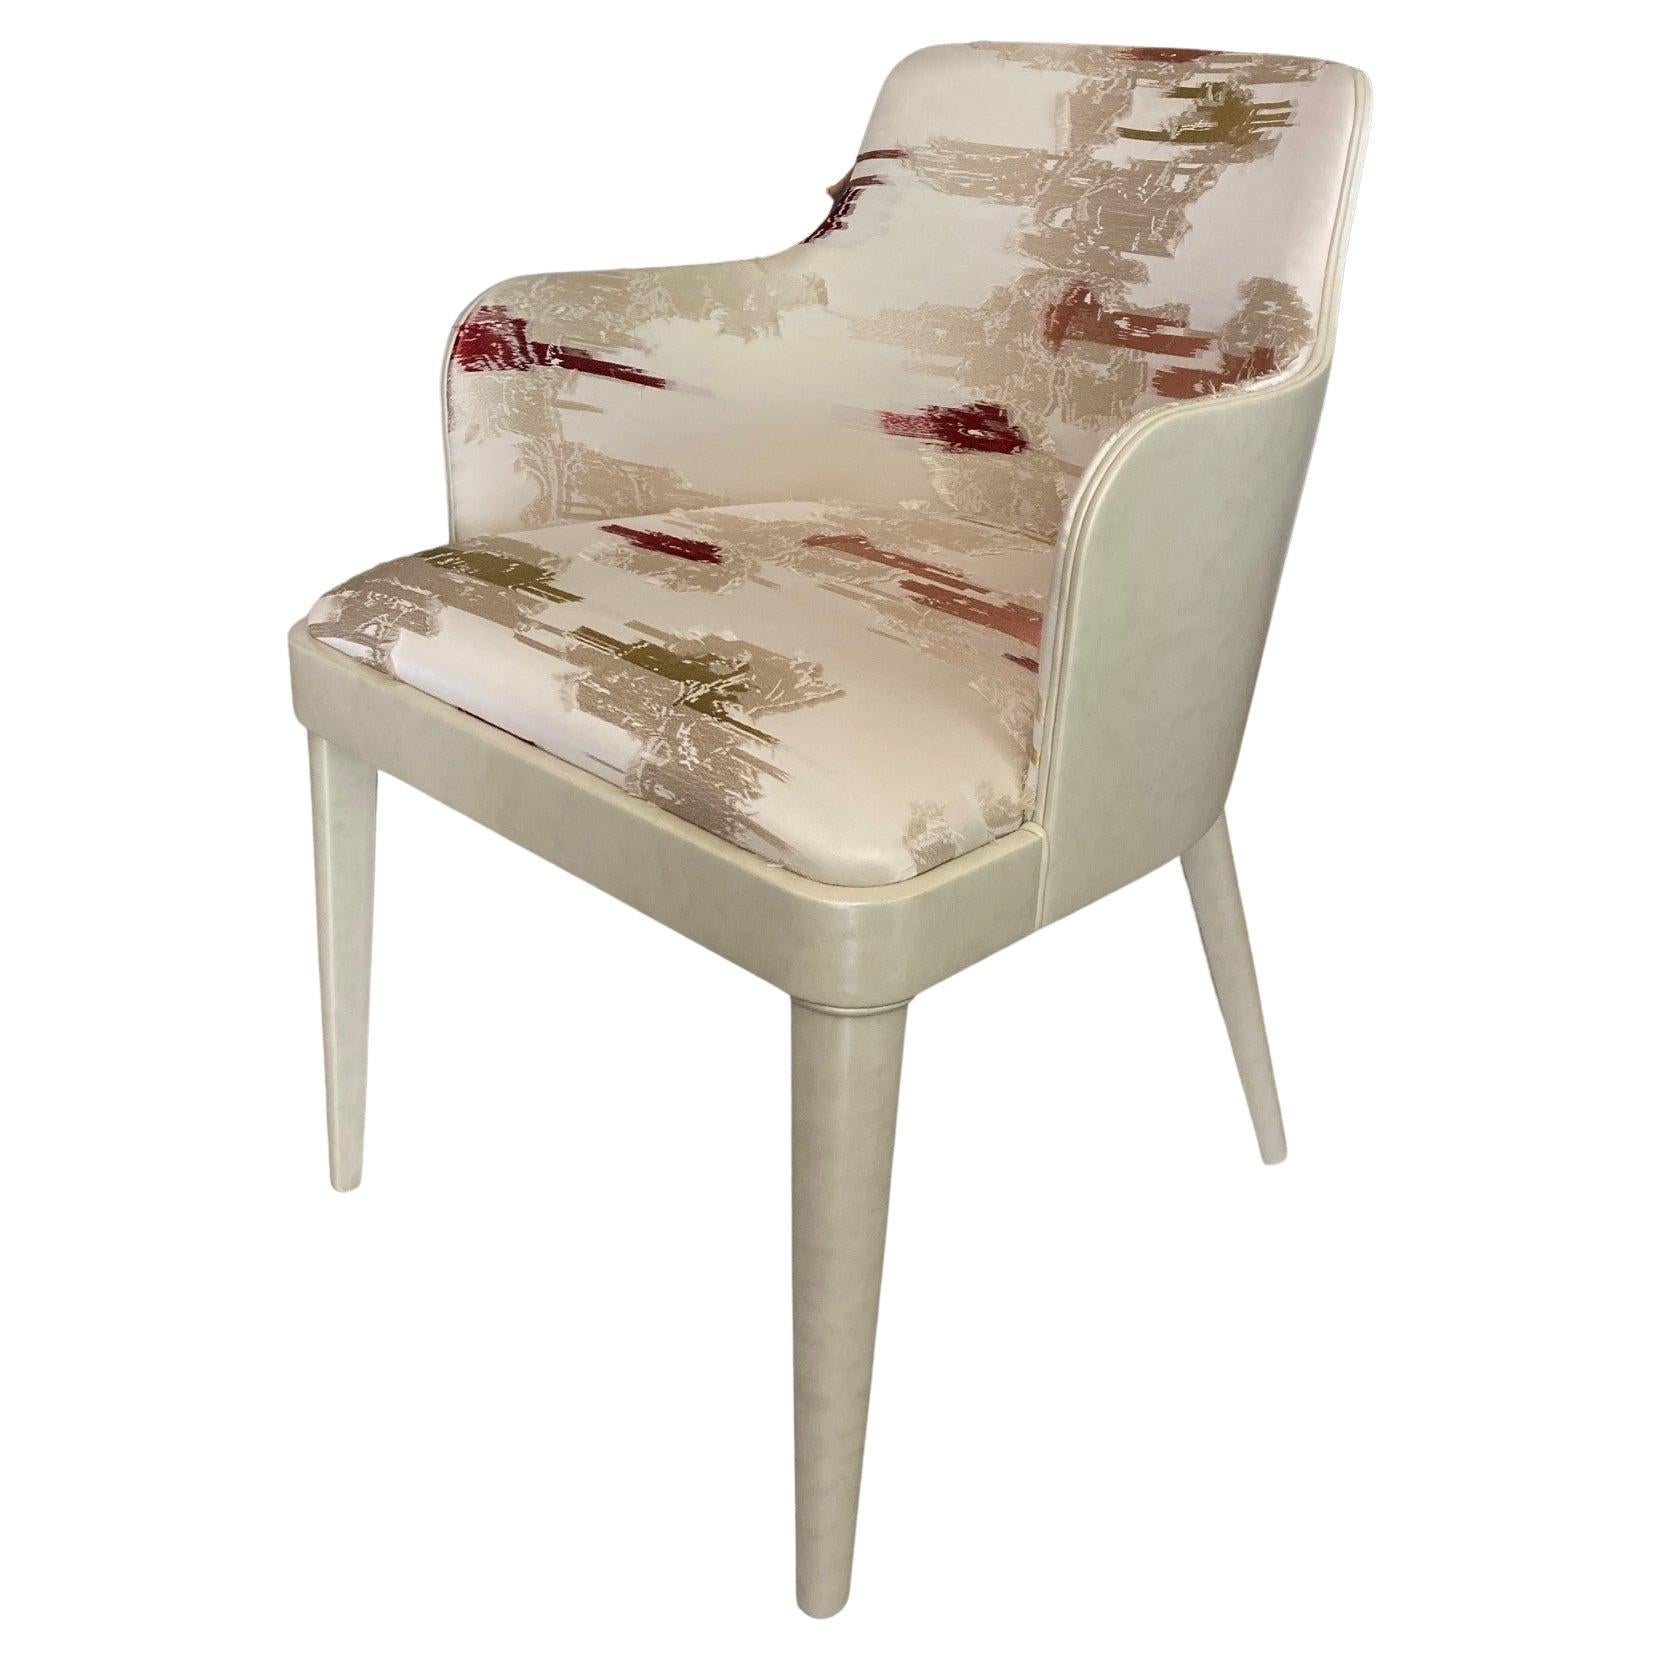 Lola Royale, the Classic Upholstered Armchair Covered with Fine Fabric For Sale